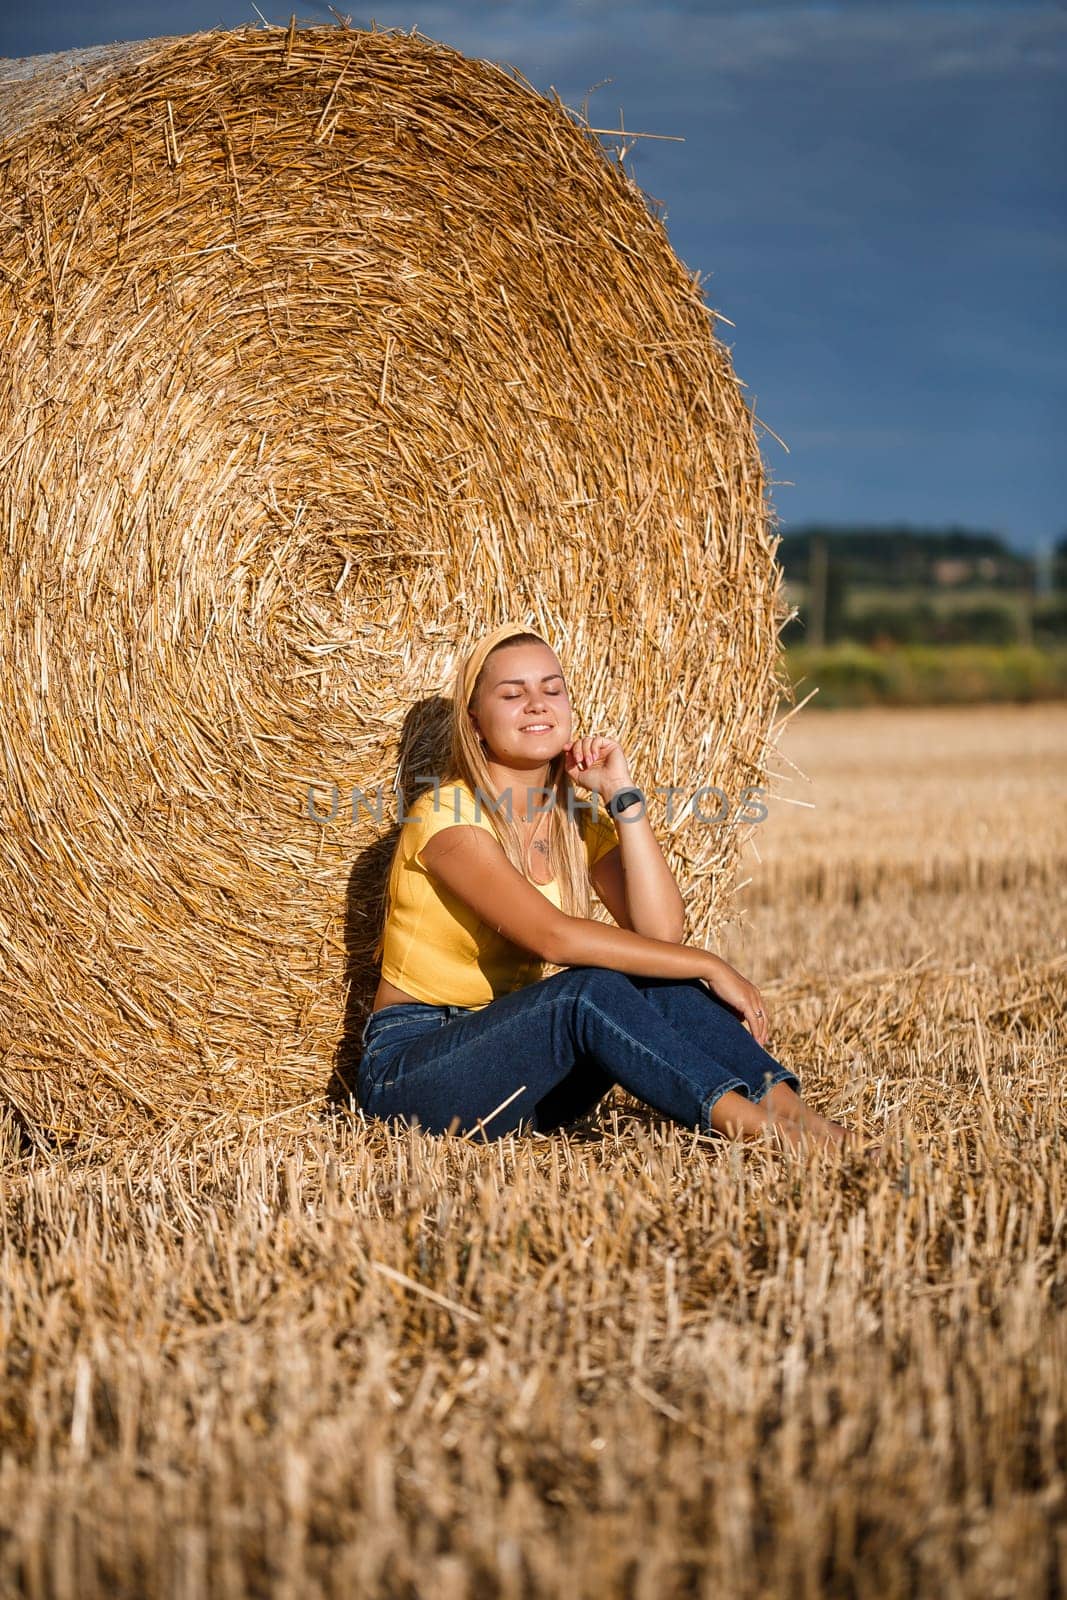 Beautiful young woman near a sheaf of hay in a field. Holidays in the village, a girl enjoying nature in a mown field on a sunny day